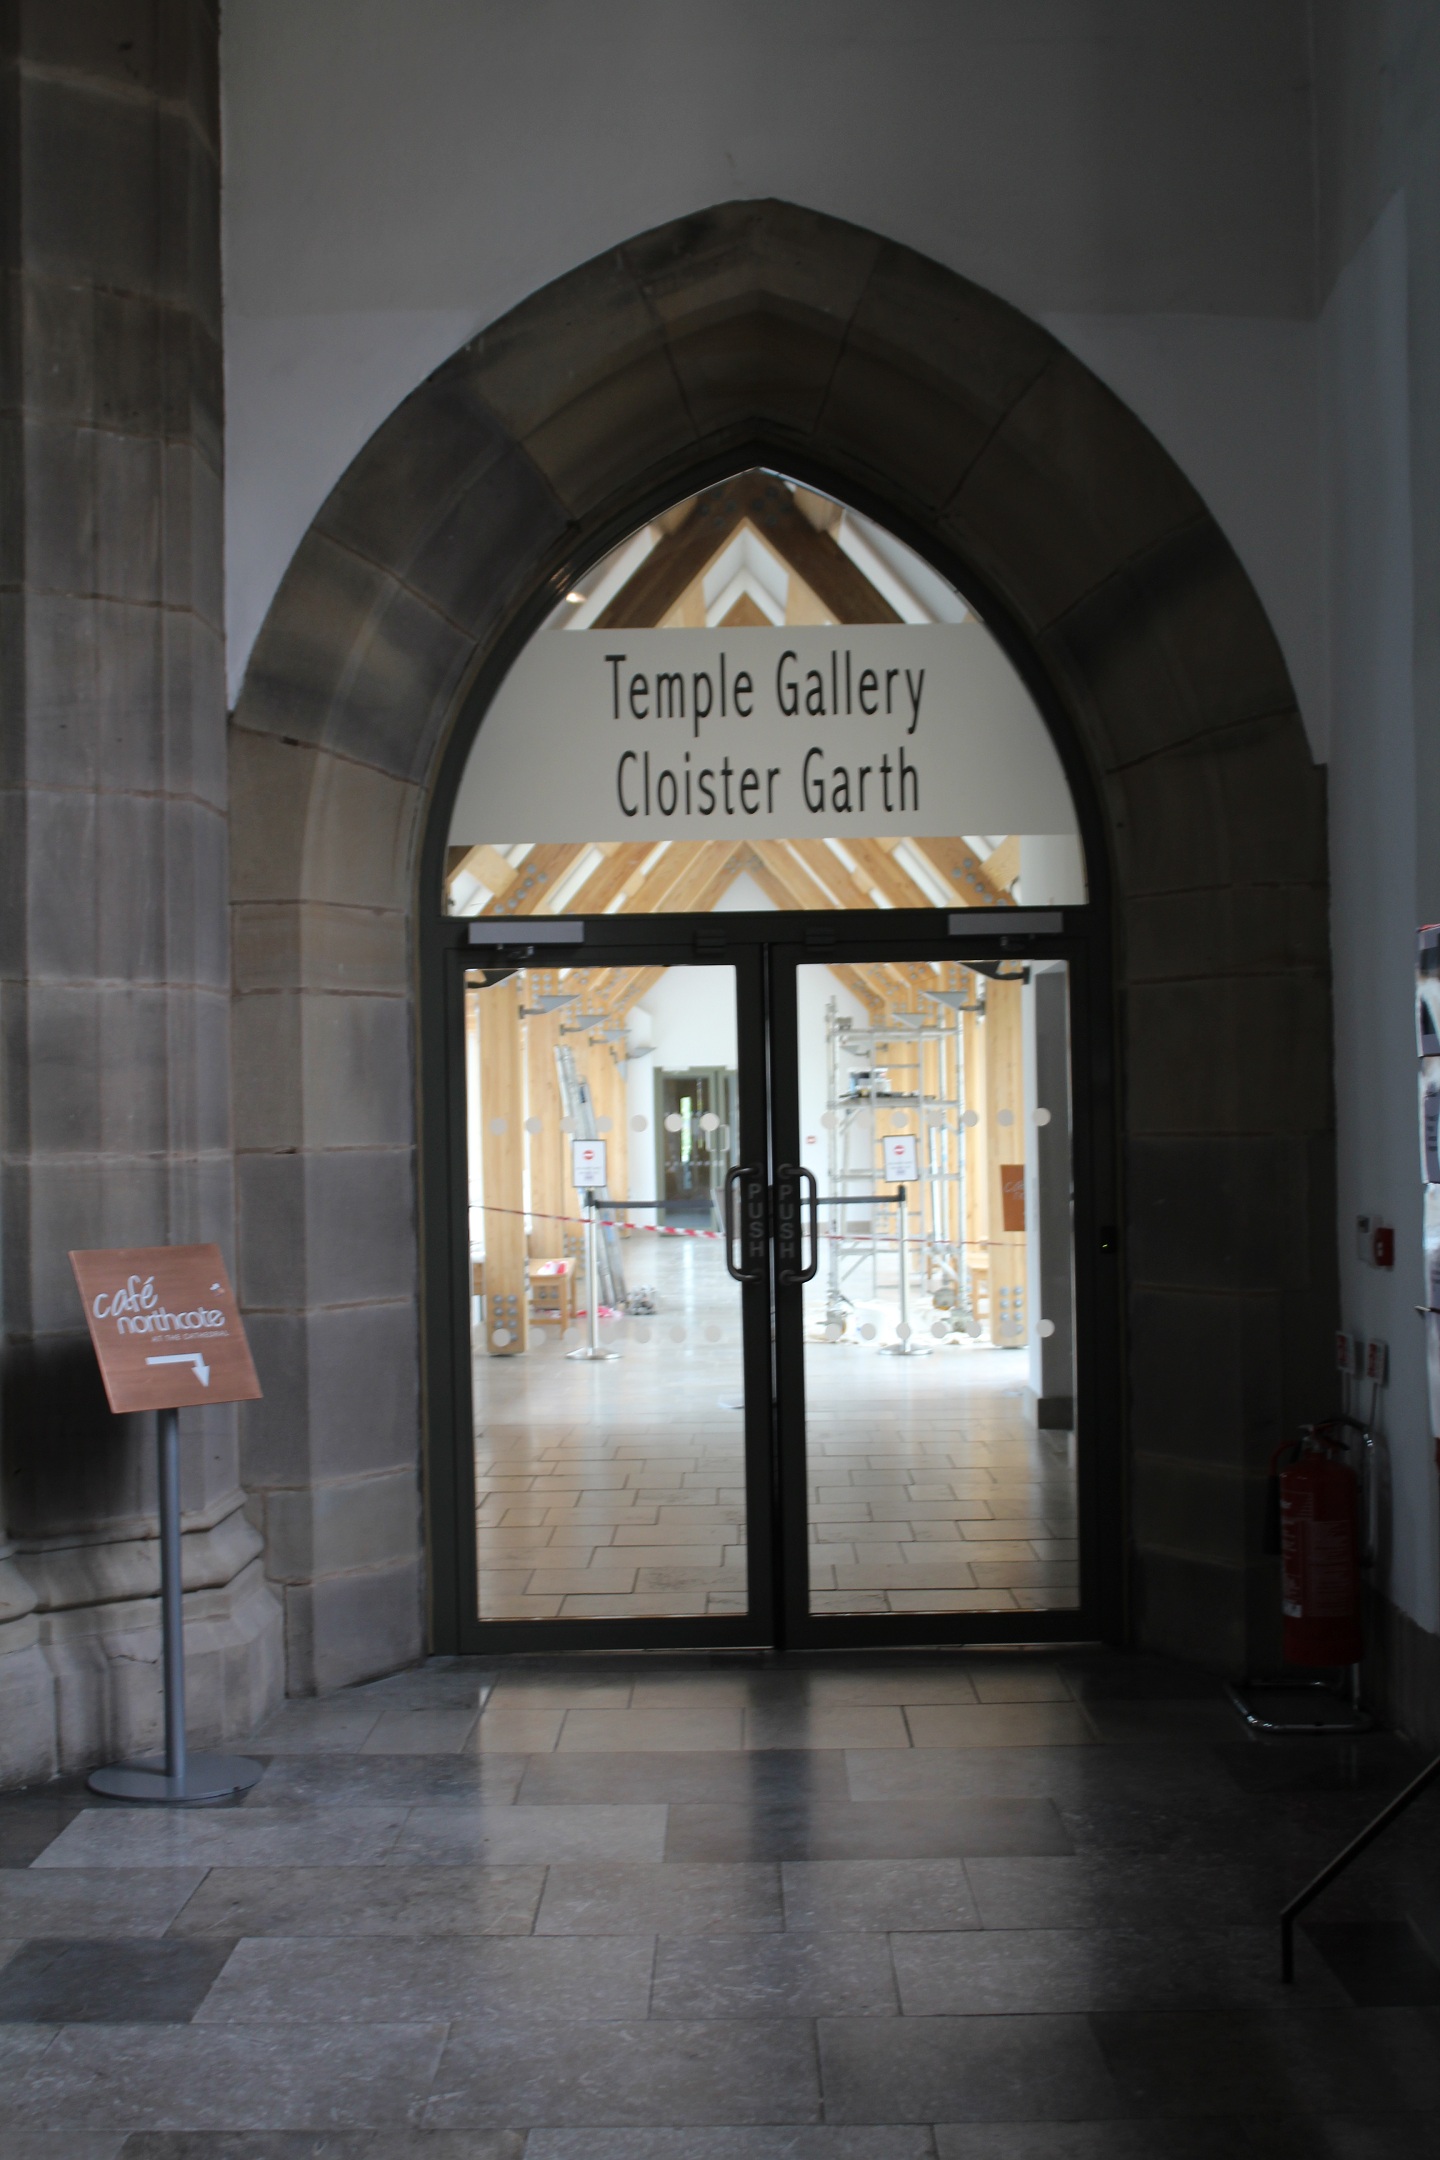 Image of the entrance to the new Cloister Garth from the main Cathedral building.